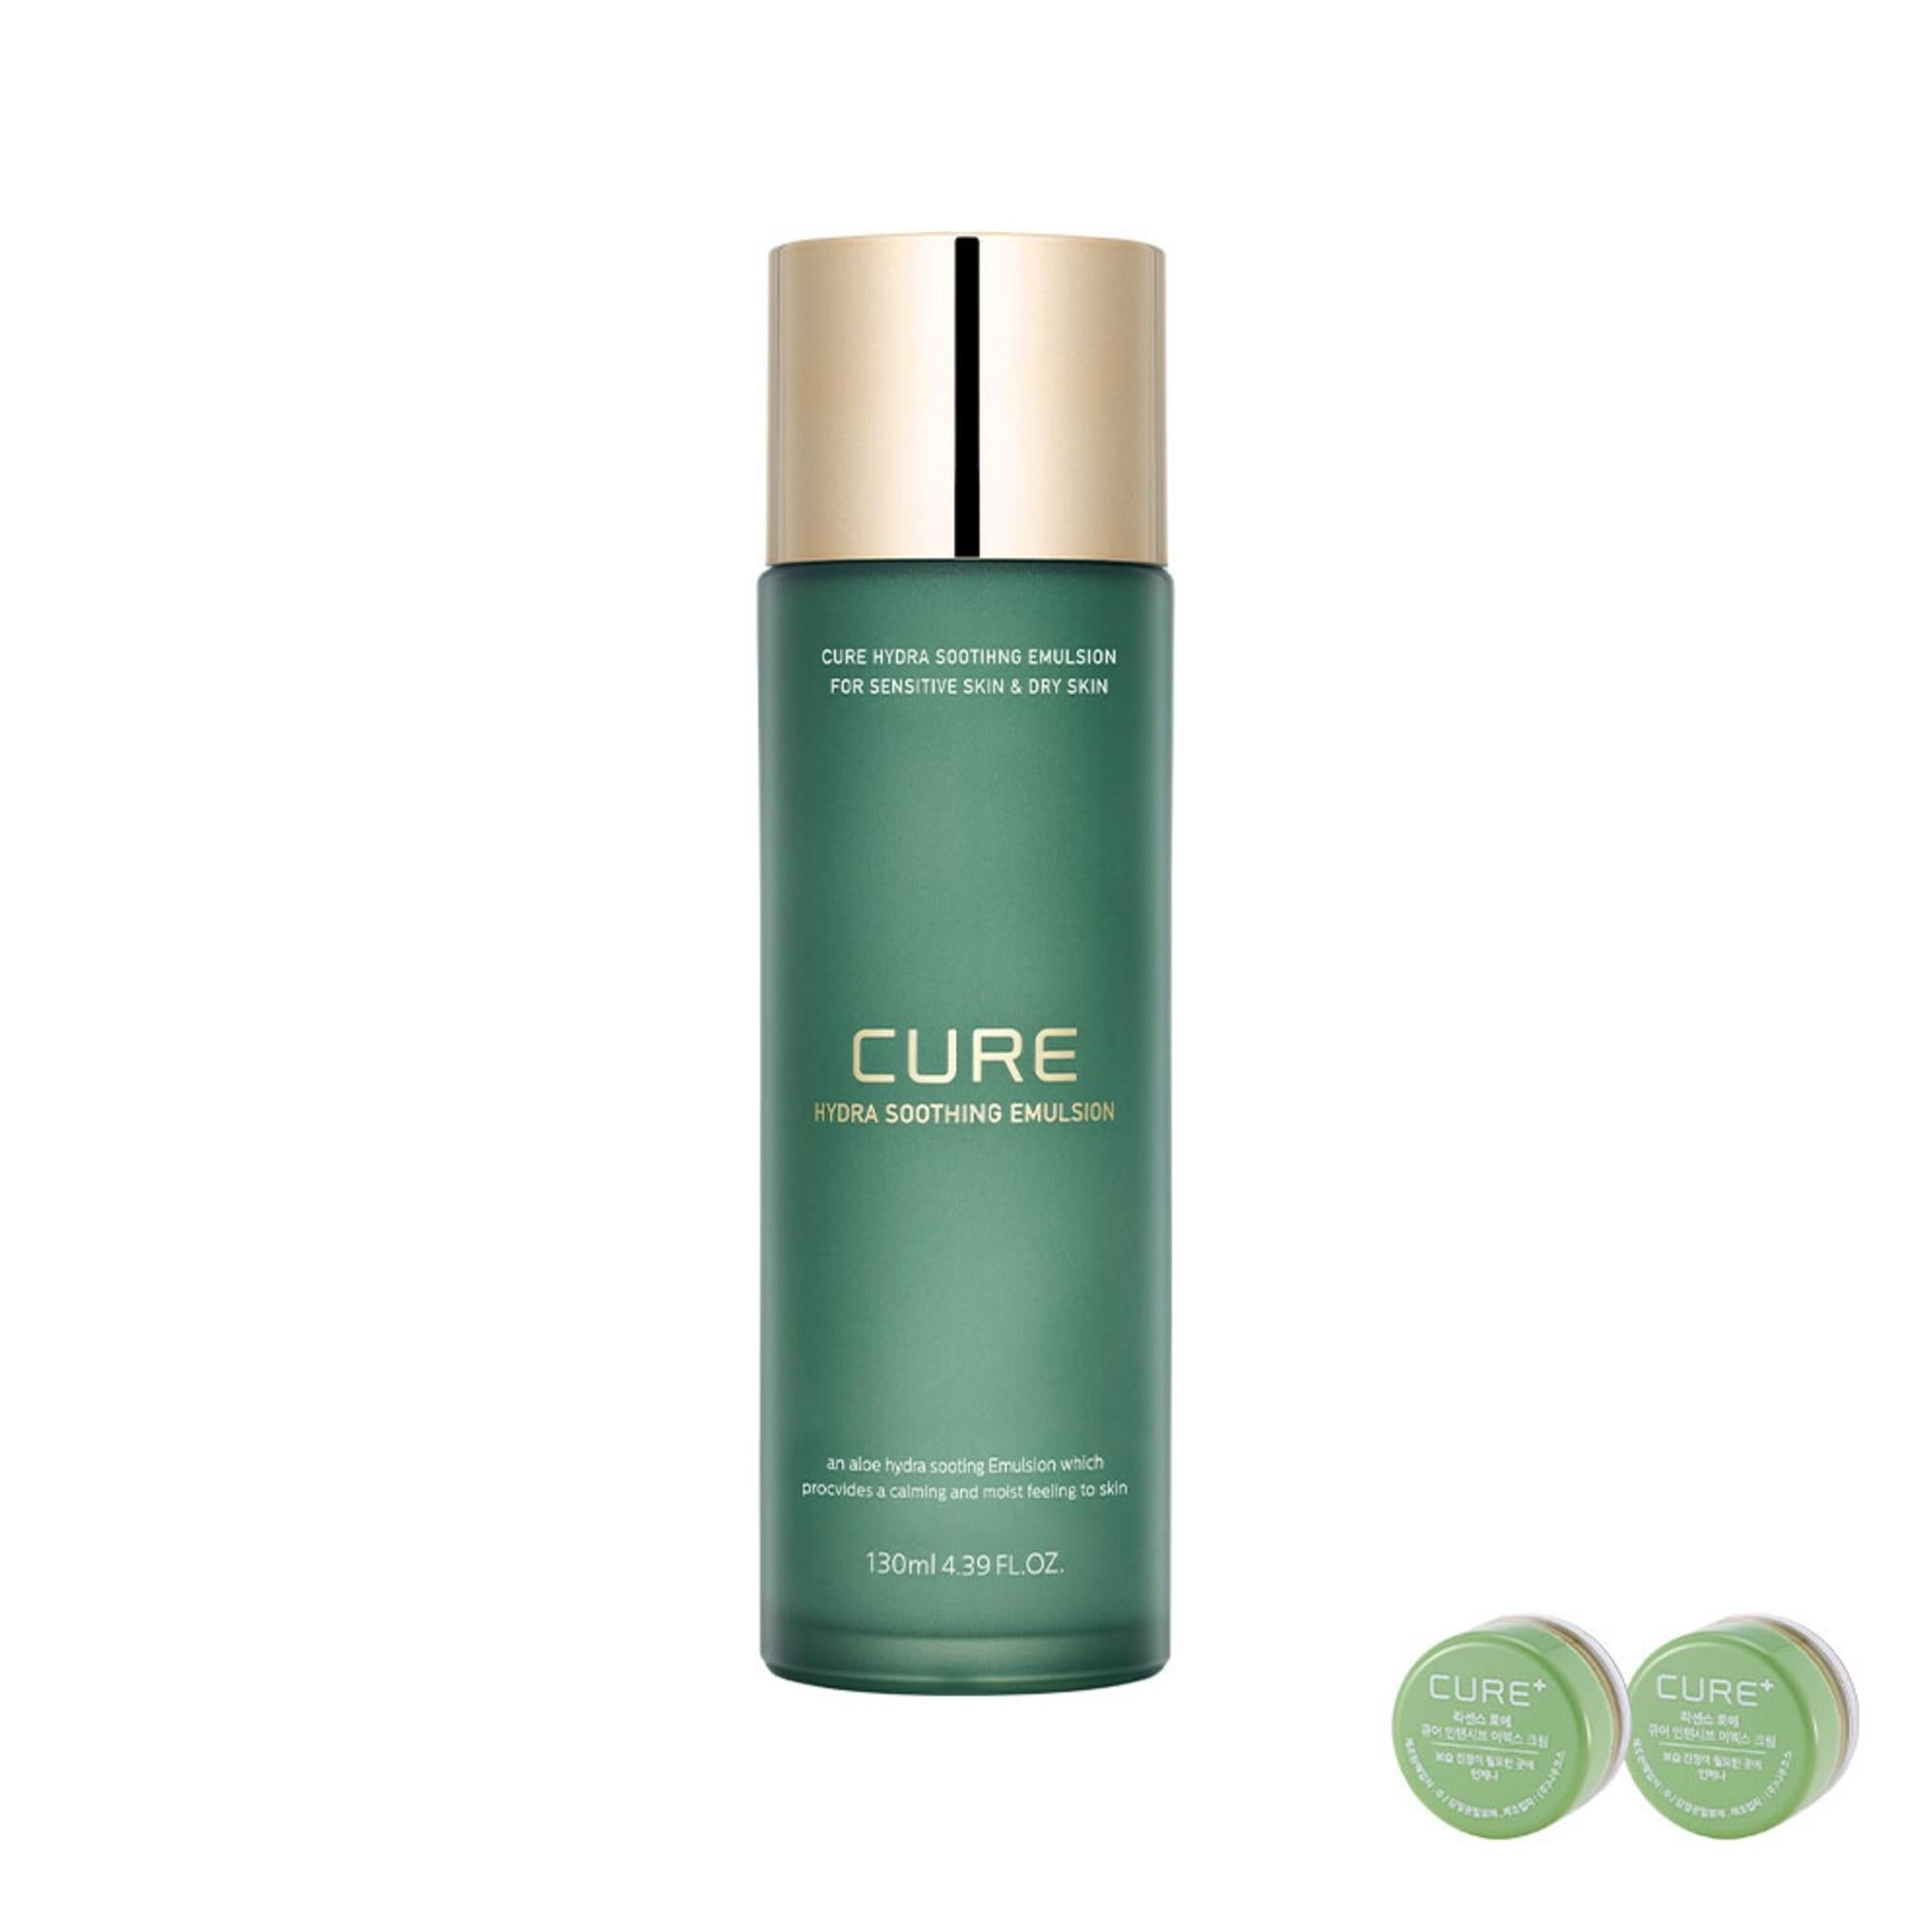 Kim Jung-moon Aloe Cure Hydra Soothing Emulsion 130ml + 2 types trial kit